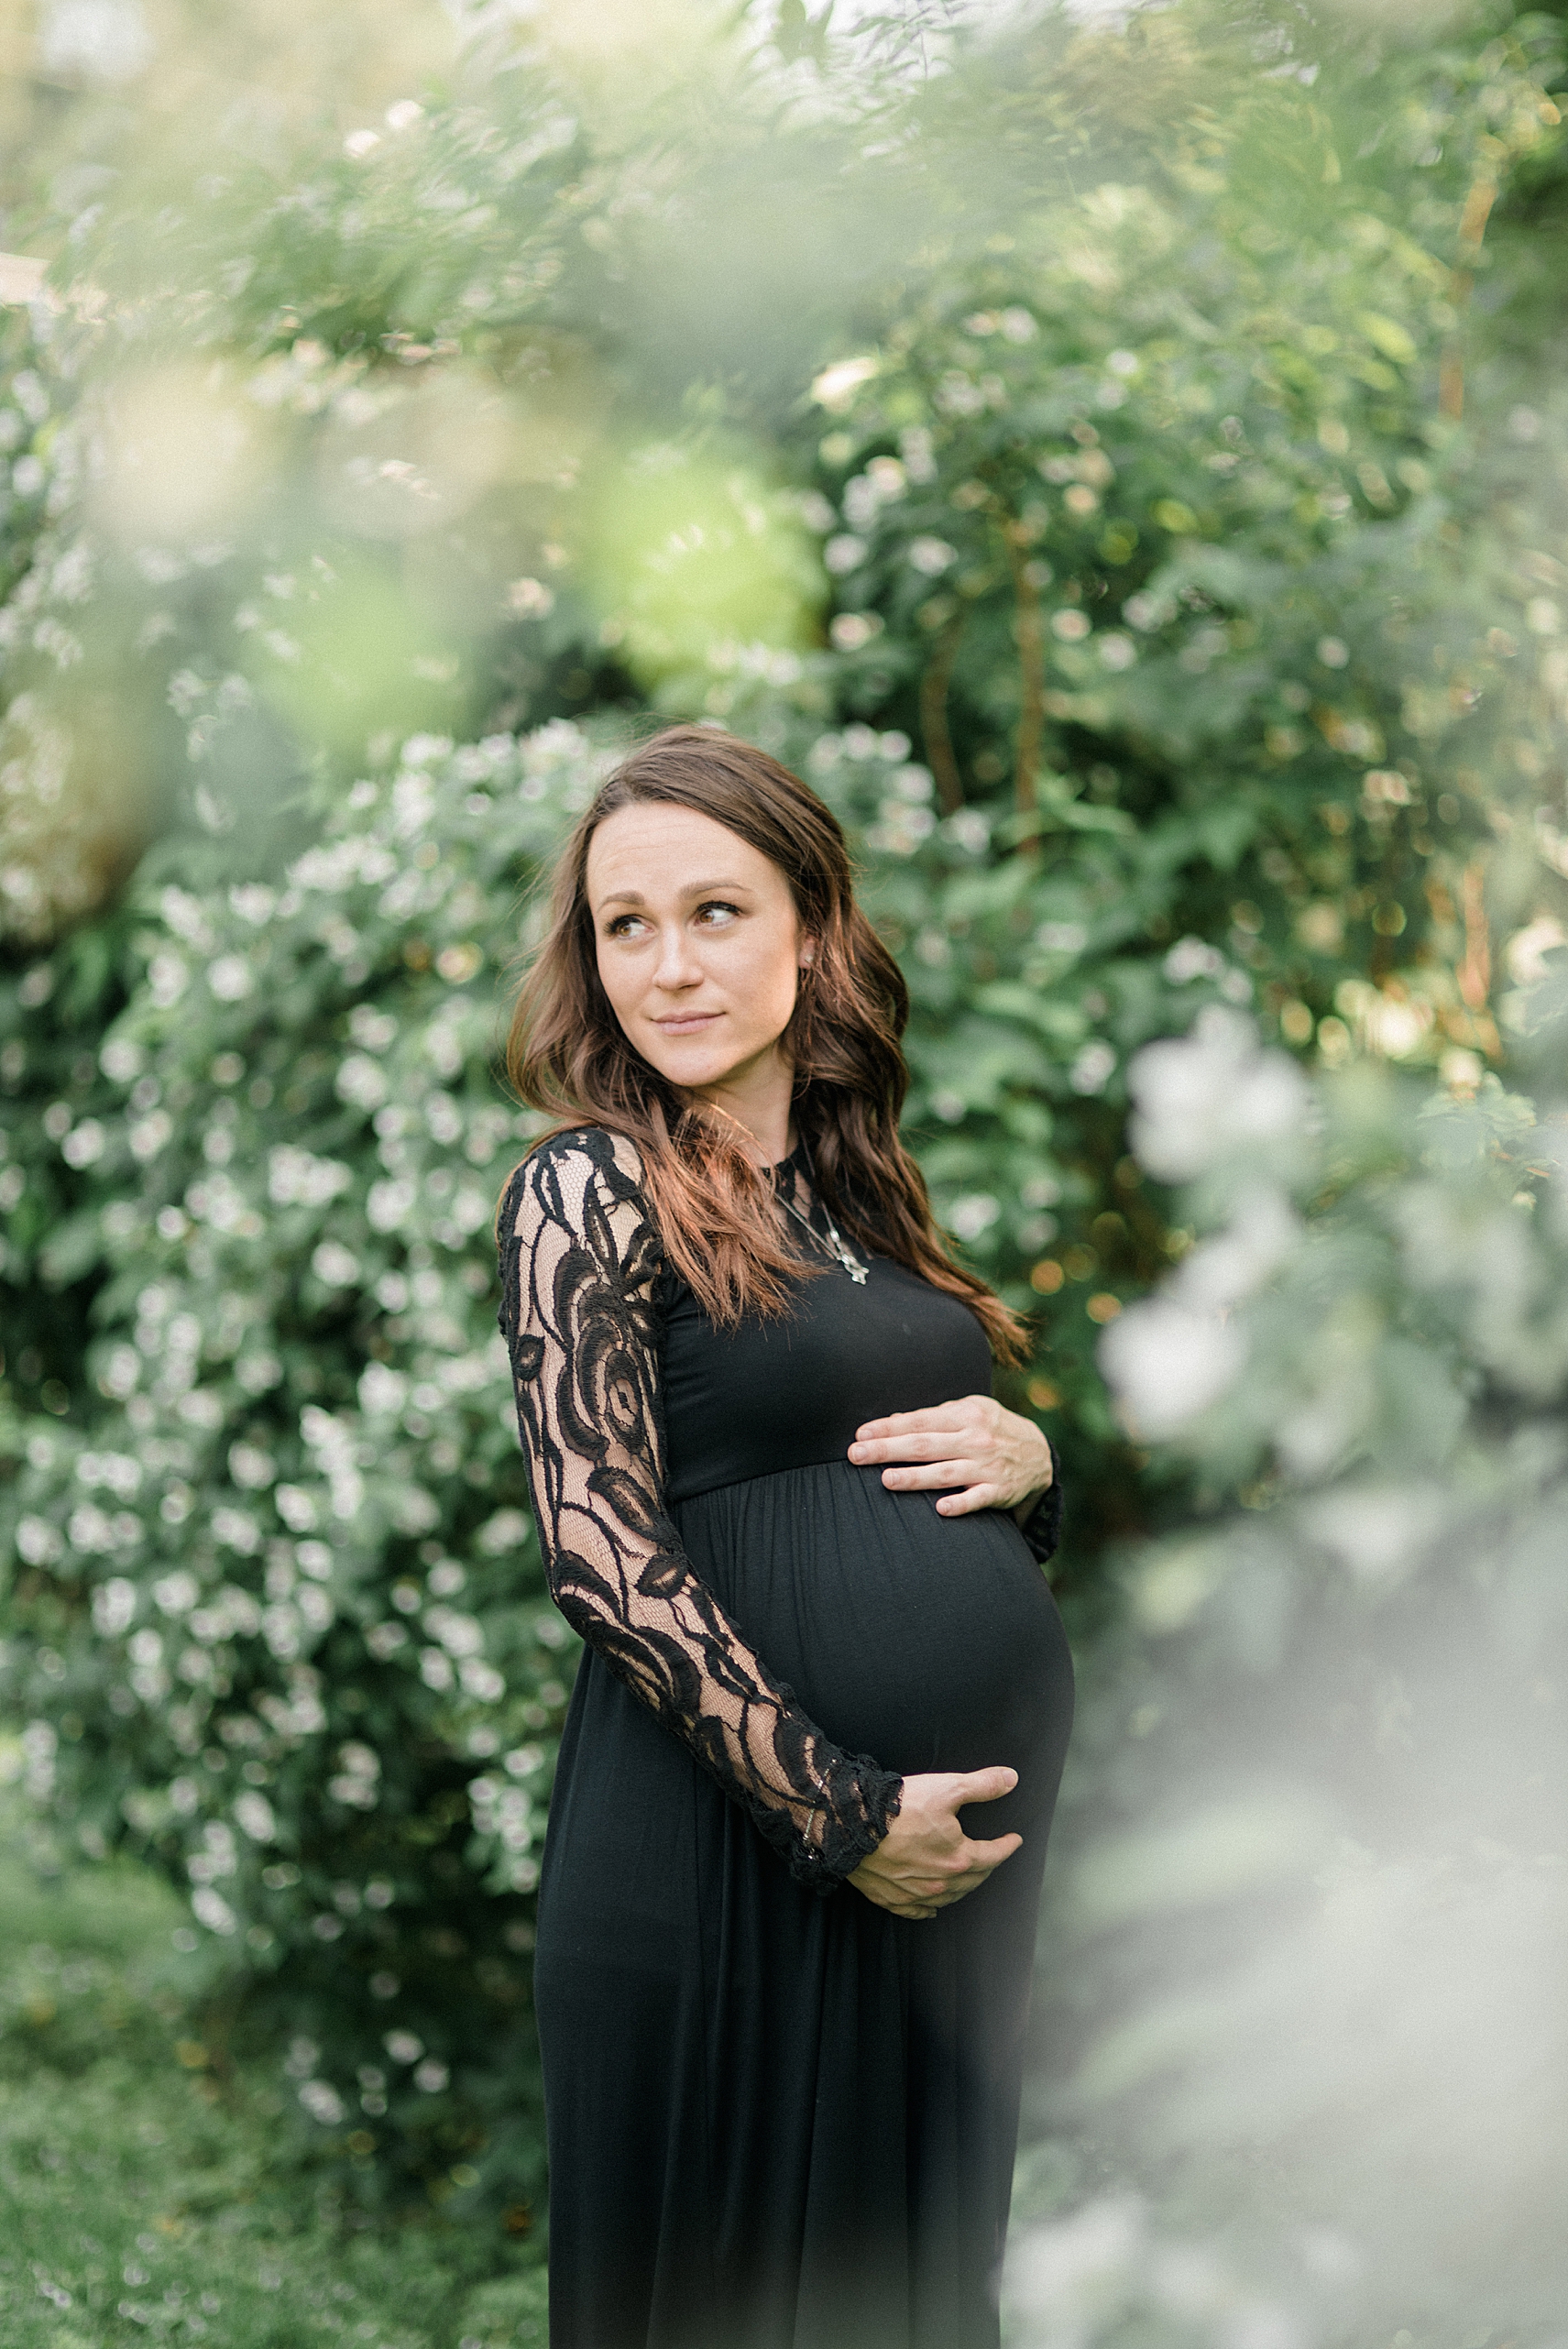 virginia maternity portrait photography ica images